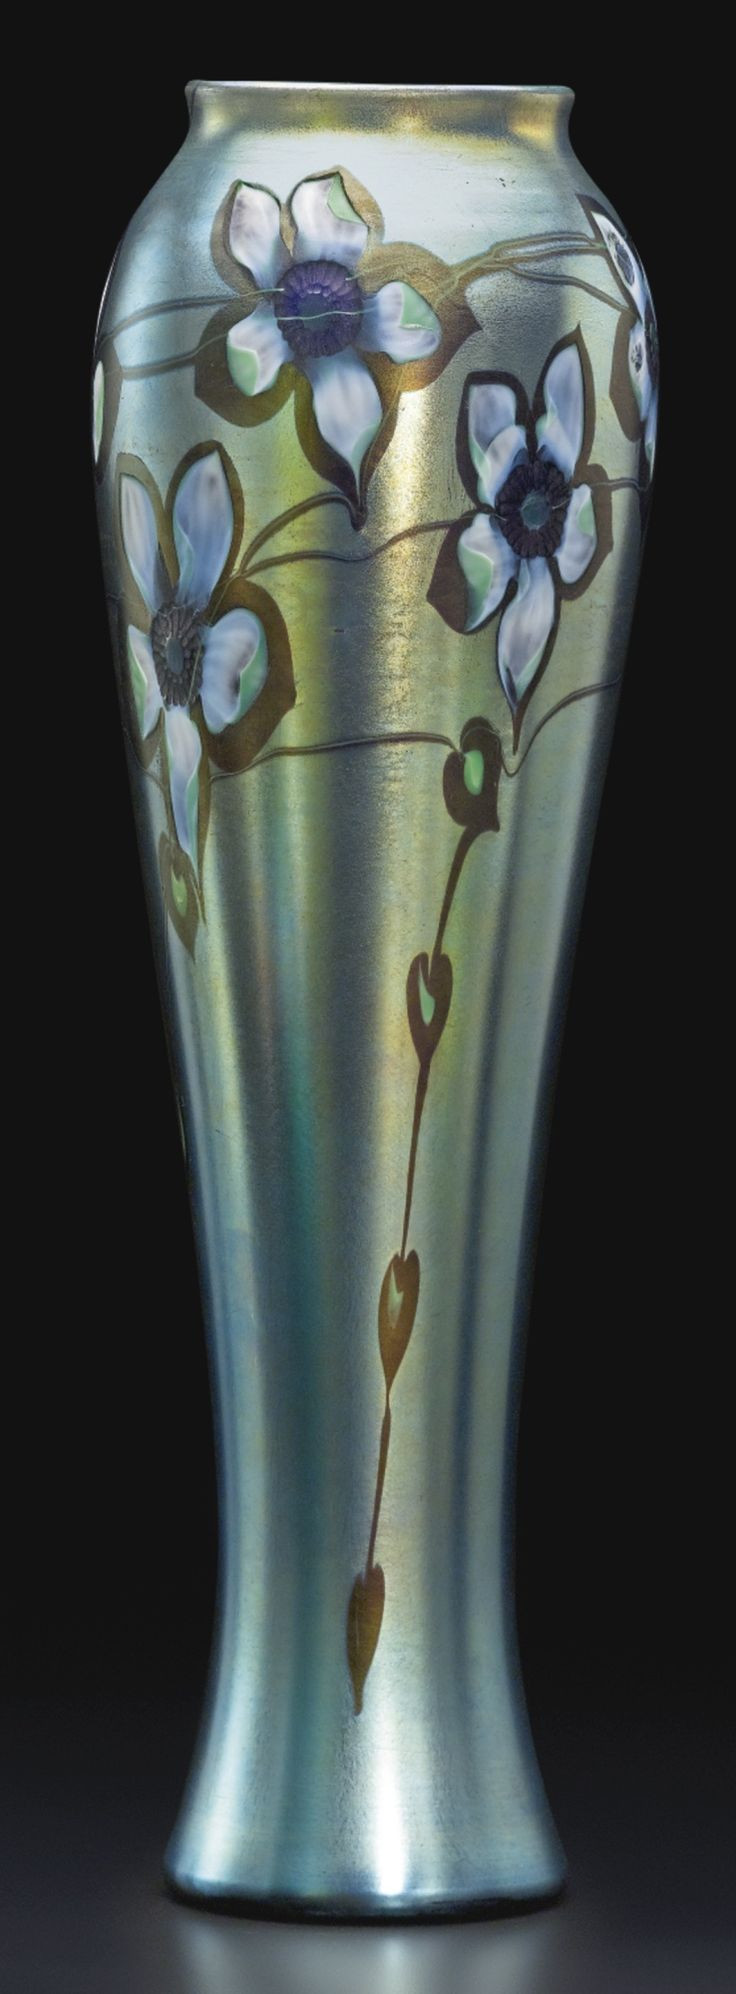 26 Spectacular Tiffany Vases Vintage 2024 free download tiffany vases vintage of 662 best tiffany images on pinterest louis comfort tiffany intended for tiffany studios carved cameo vase engraved 8036e l c tiffany favrile favrile glass 17 1